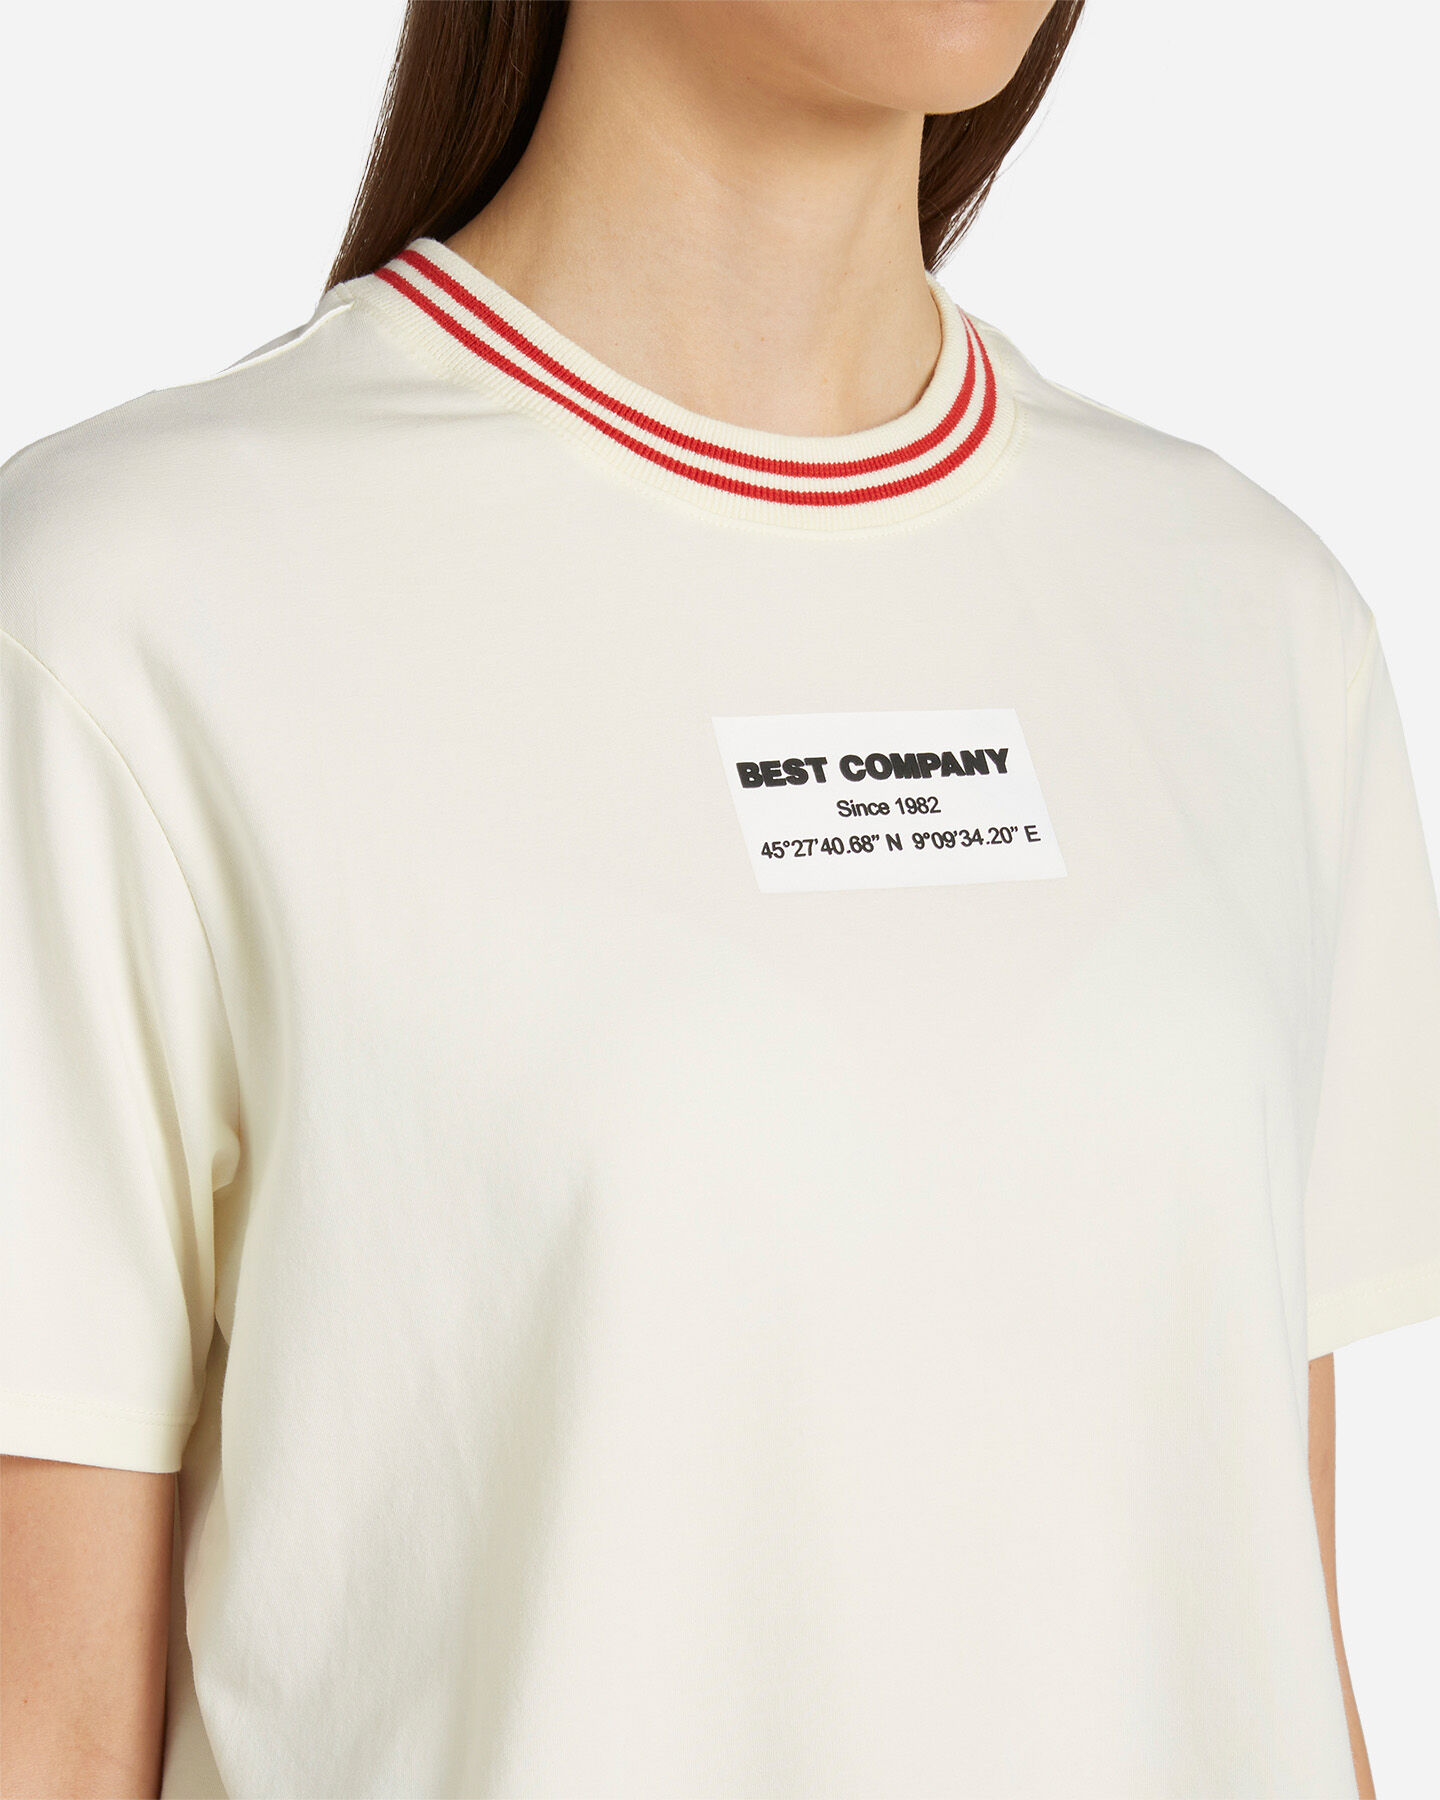  T-Shirt BEST COMPANY NECK CONTRAST W S4104105|001C|S scatto 4